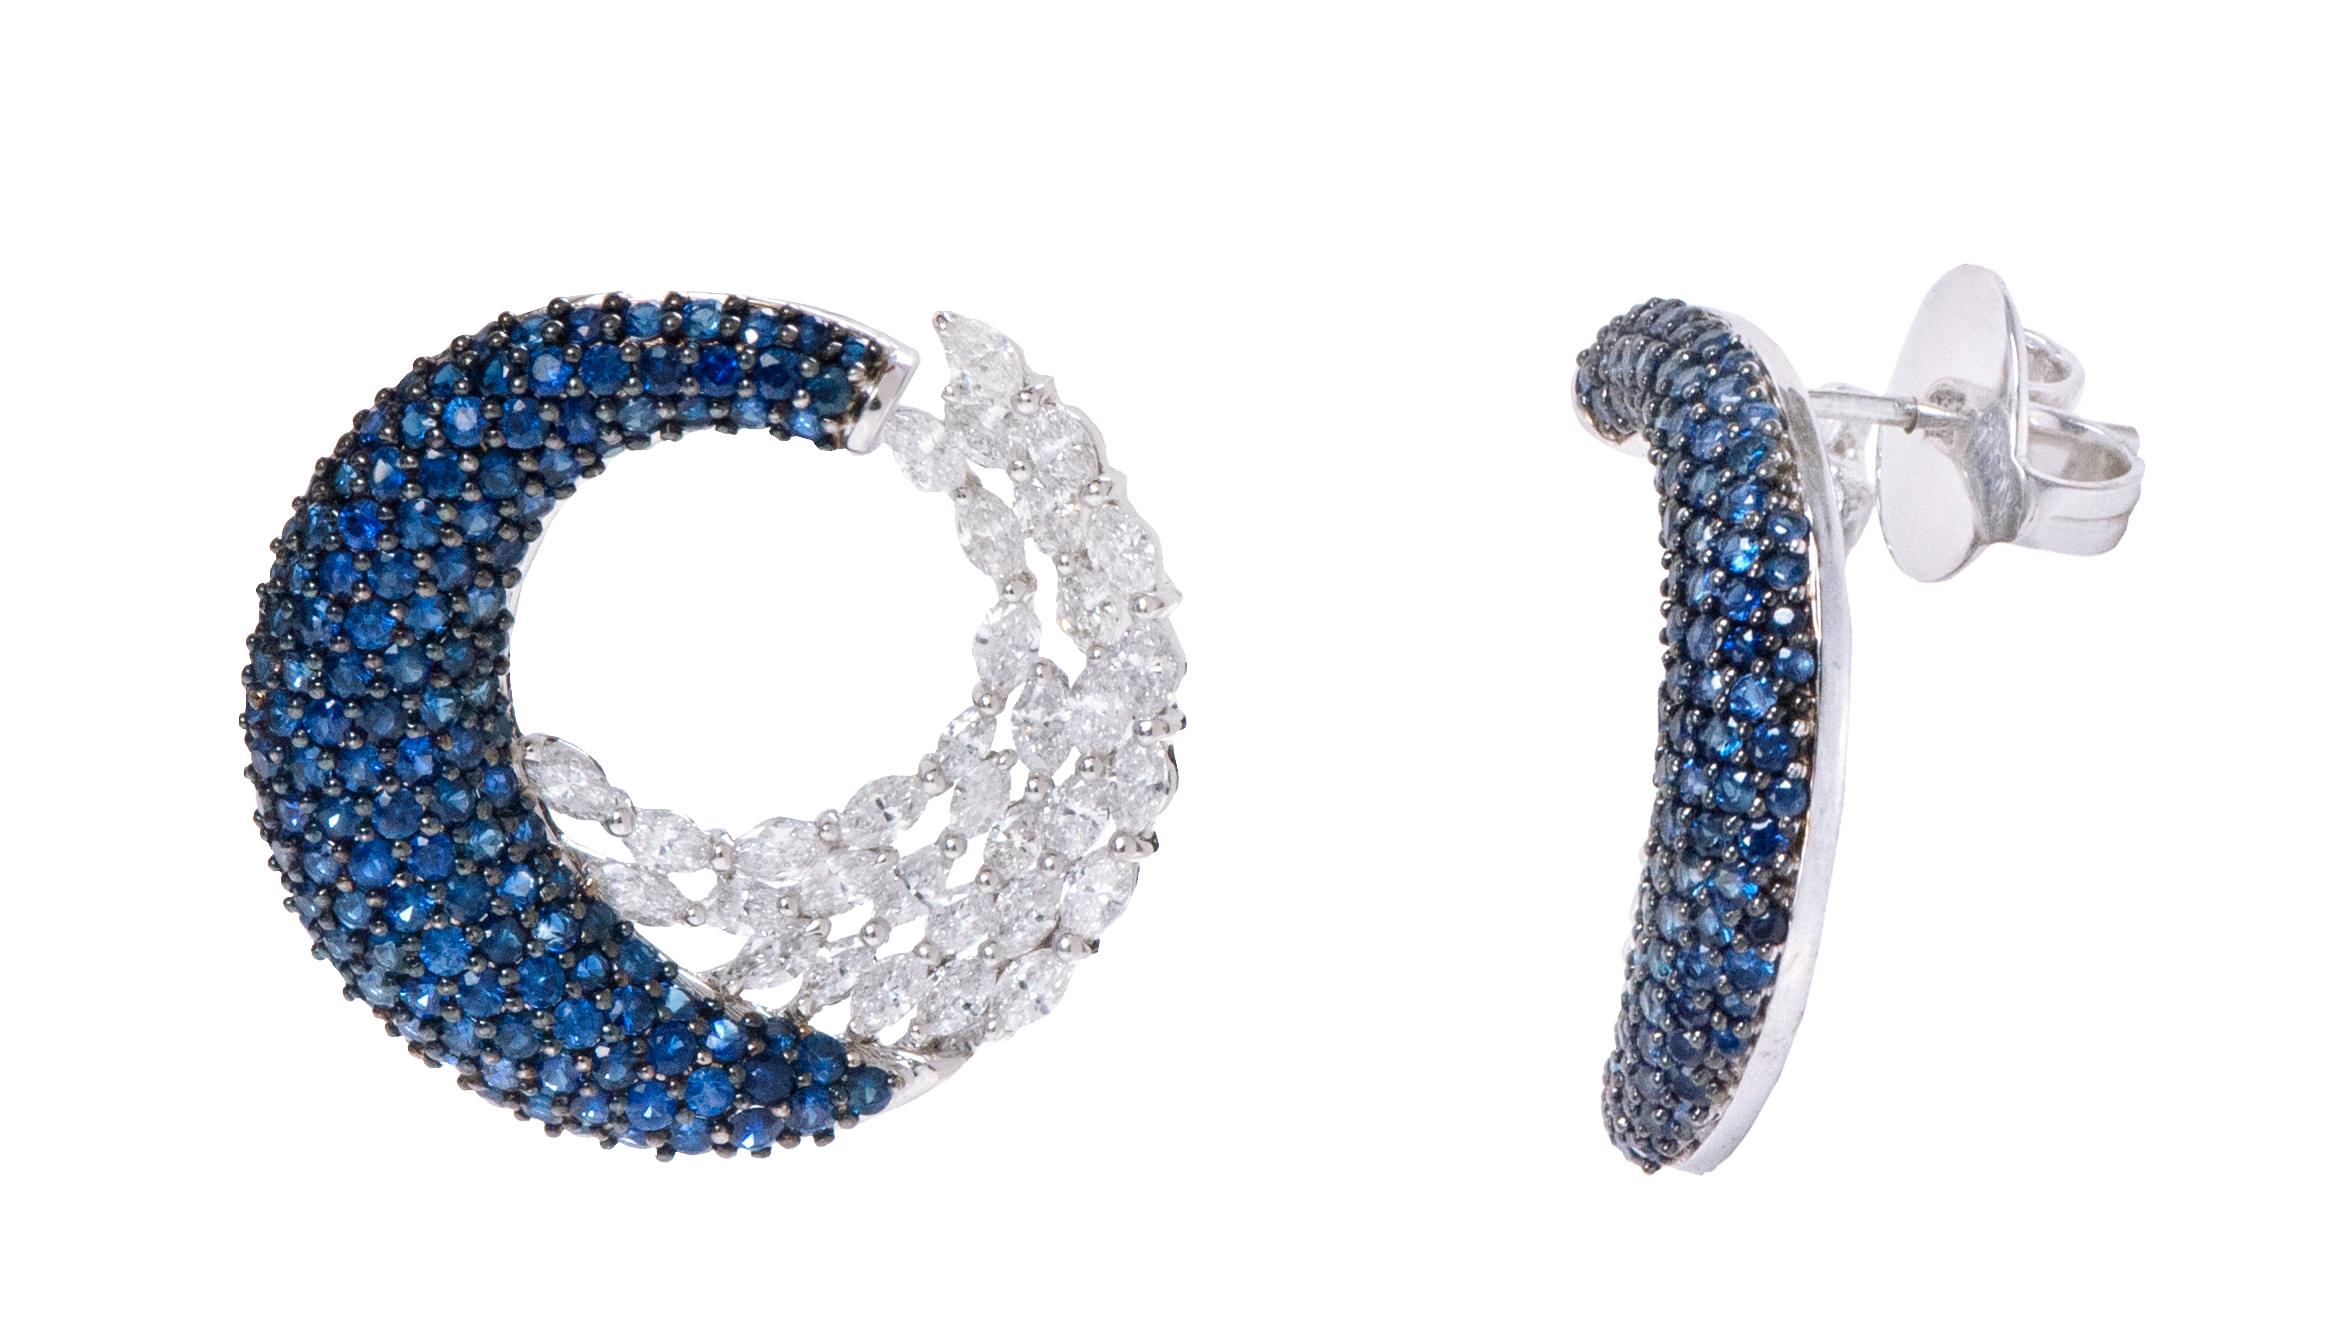 18 Karat White Gold 5.67 Carat Blue Sapphire and Diamond Cocktail Hoop Earrings

This glamorous royal blue sapphire and diamond modern ear hoop earring is truly exceptional. The unique hoop style covering the front, diverges it away from the